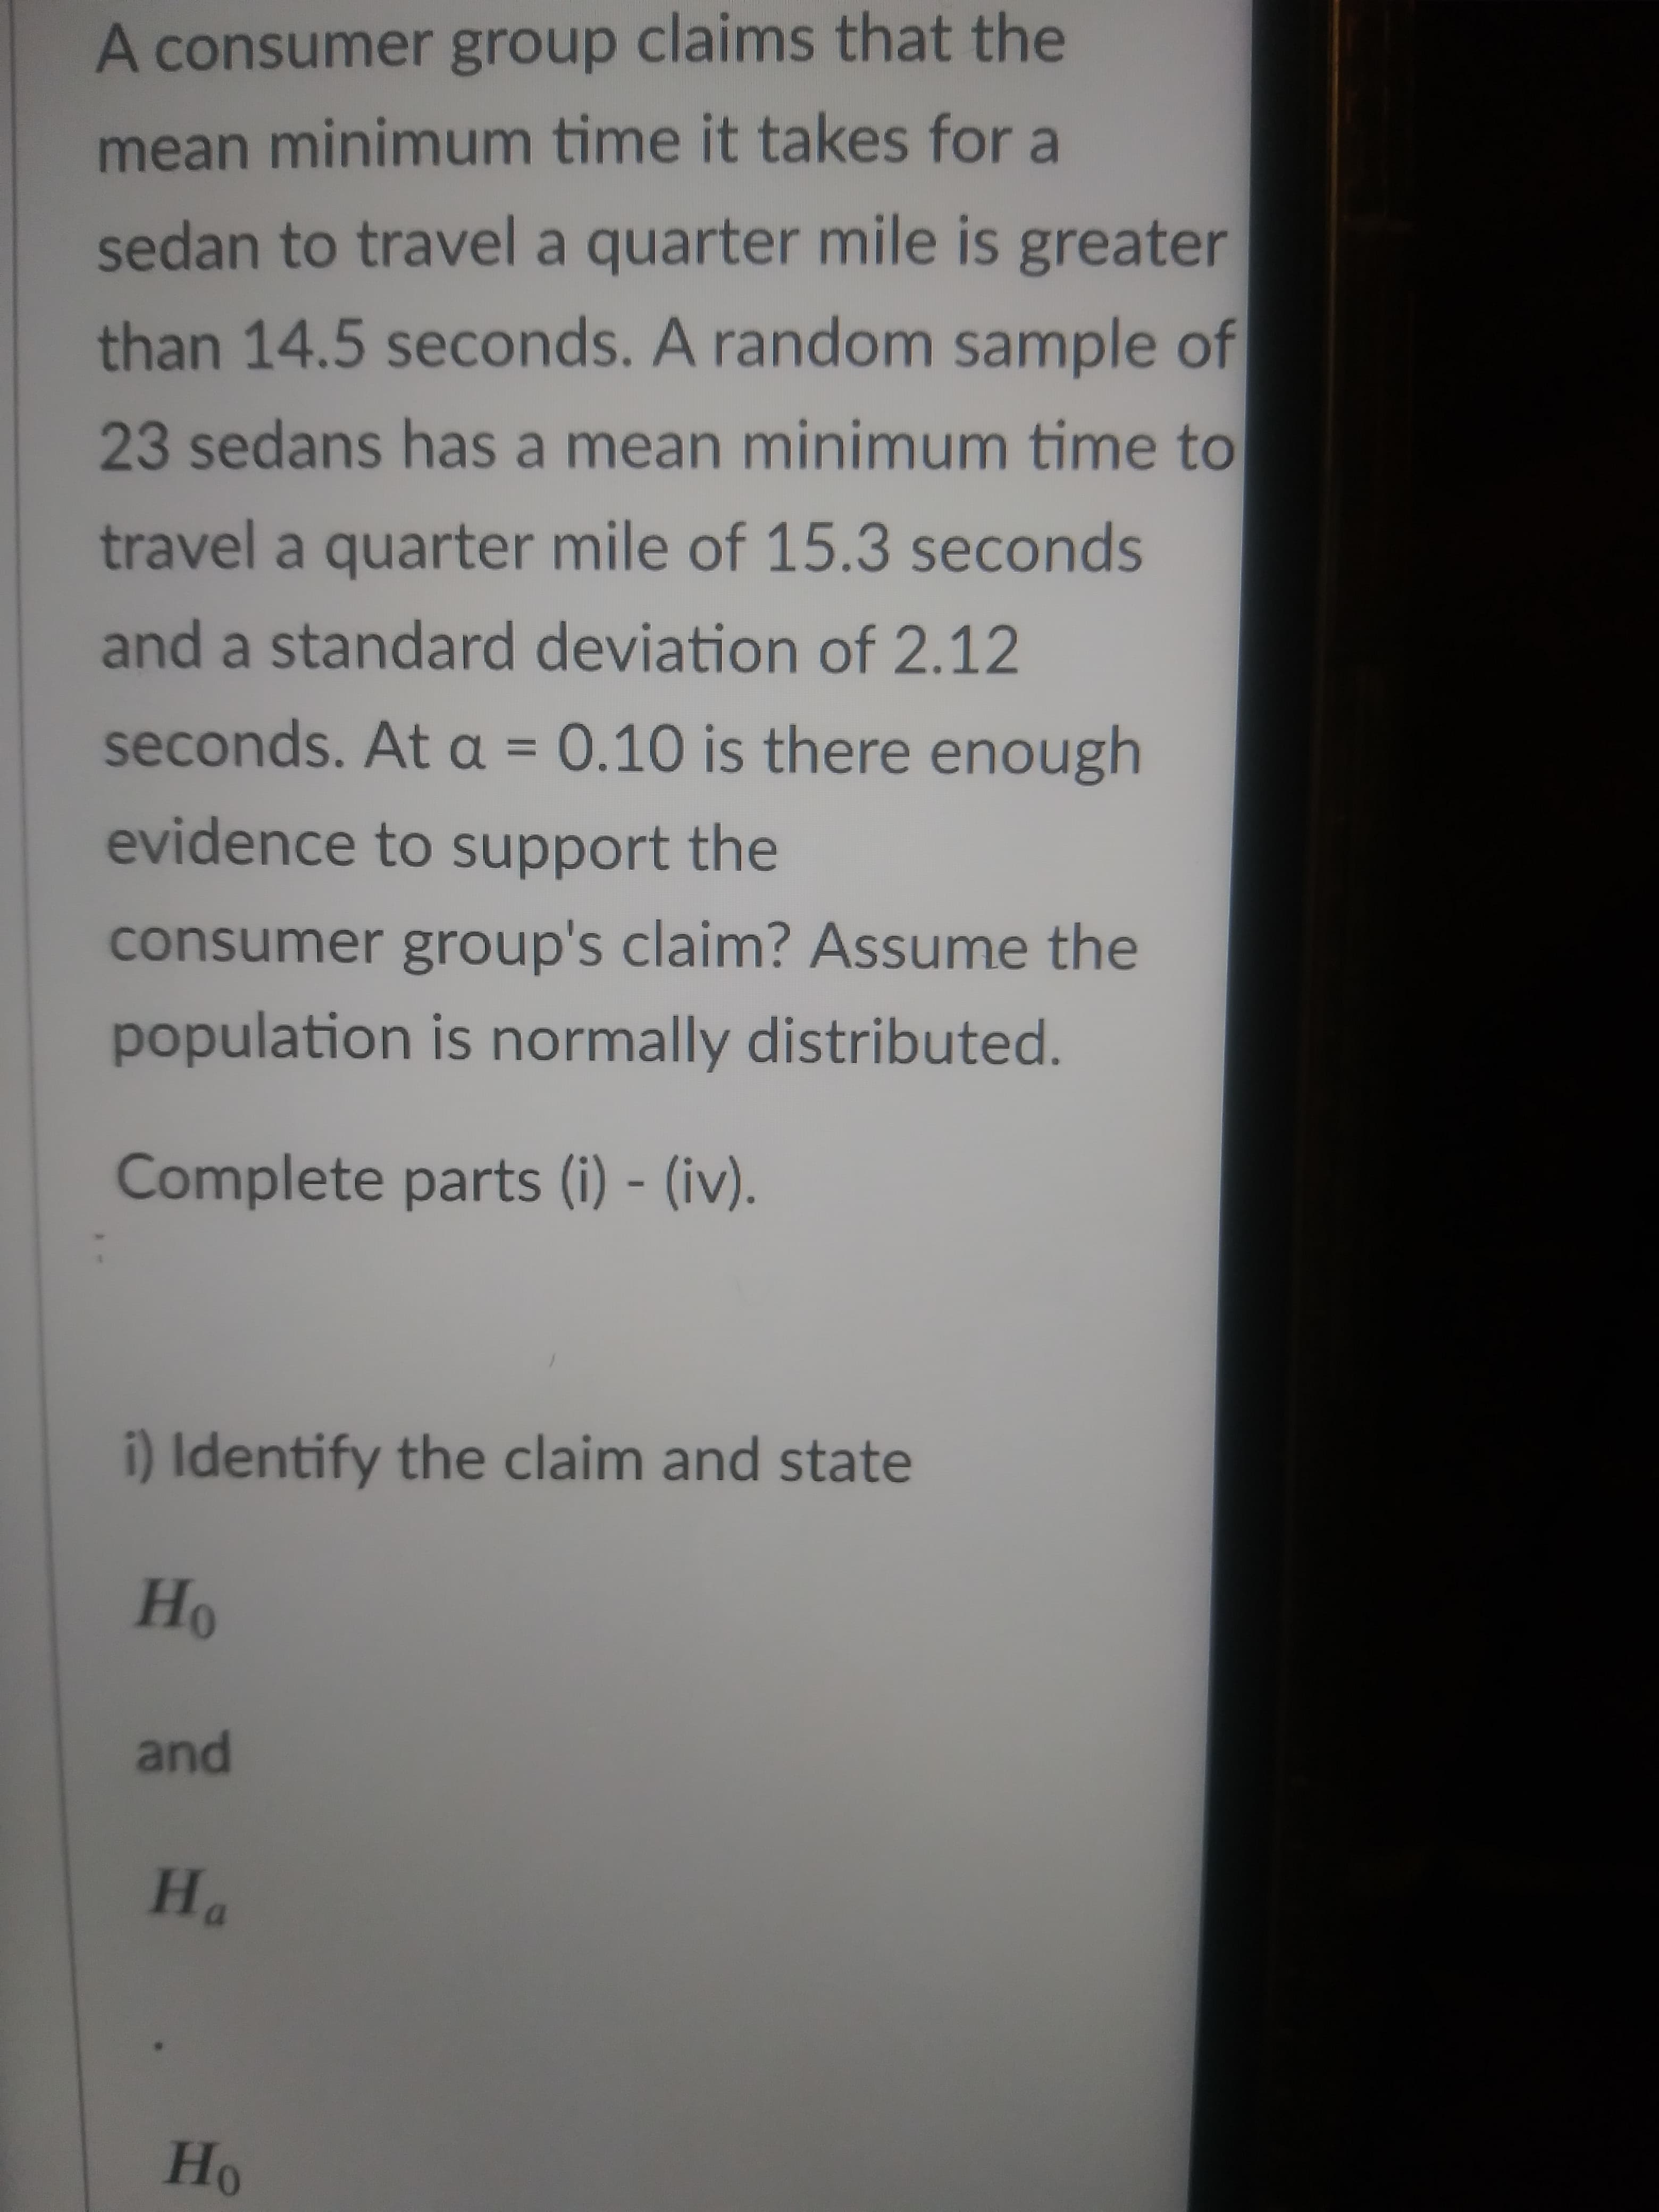 A consumer group claims that the
mean minimum time it takes for a
sedan to travel a quarter mile is greater
than 14.5 seconds. A random sample of
23 sedans has a mean minimum time to
travel a quarter mile of 15.3 seconds
and a standard deviation of 2.12
seconds. At a = 0.10 is there enough
%3D
evidence to support the
consumer group's claim? Assume the
population is normally distributed.
Complete parts (i) - (iv).
i) Identify the claim and state
and
"H
